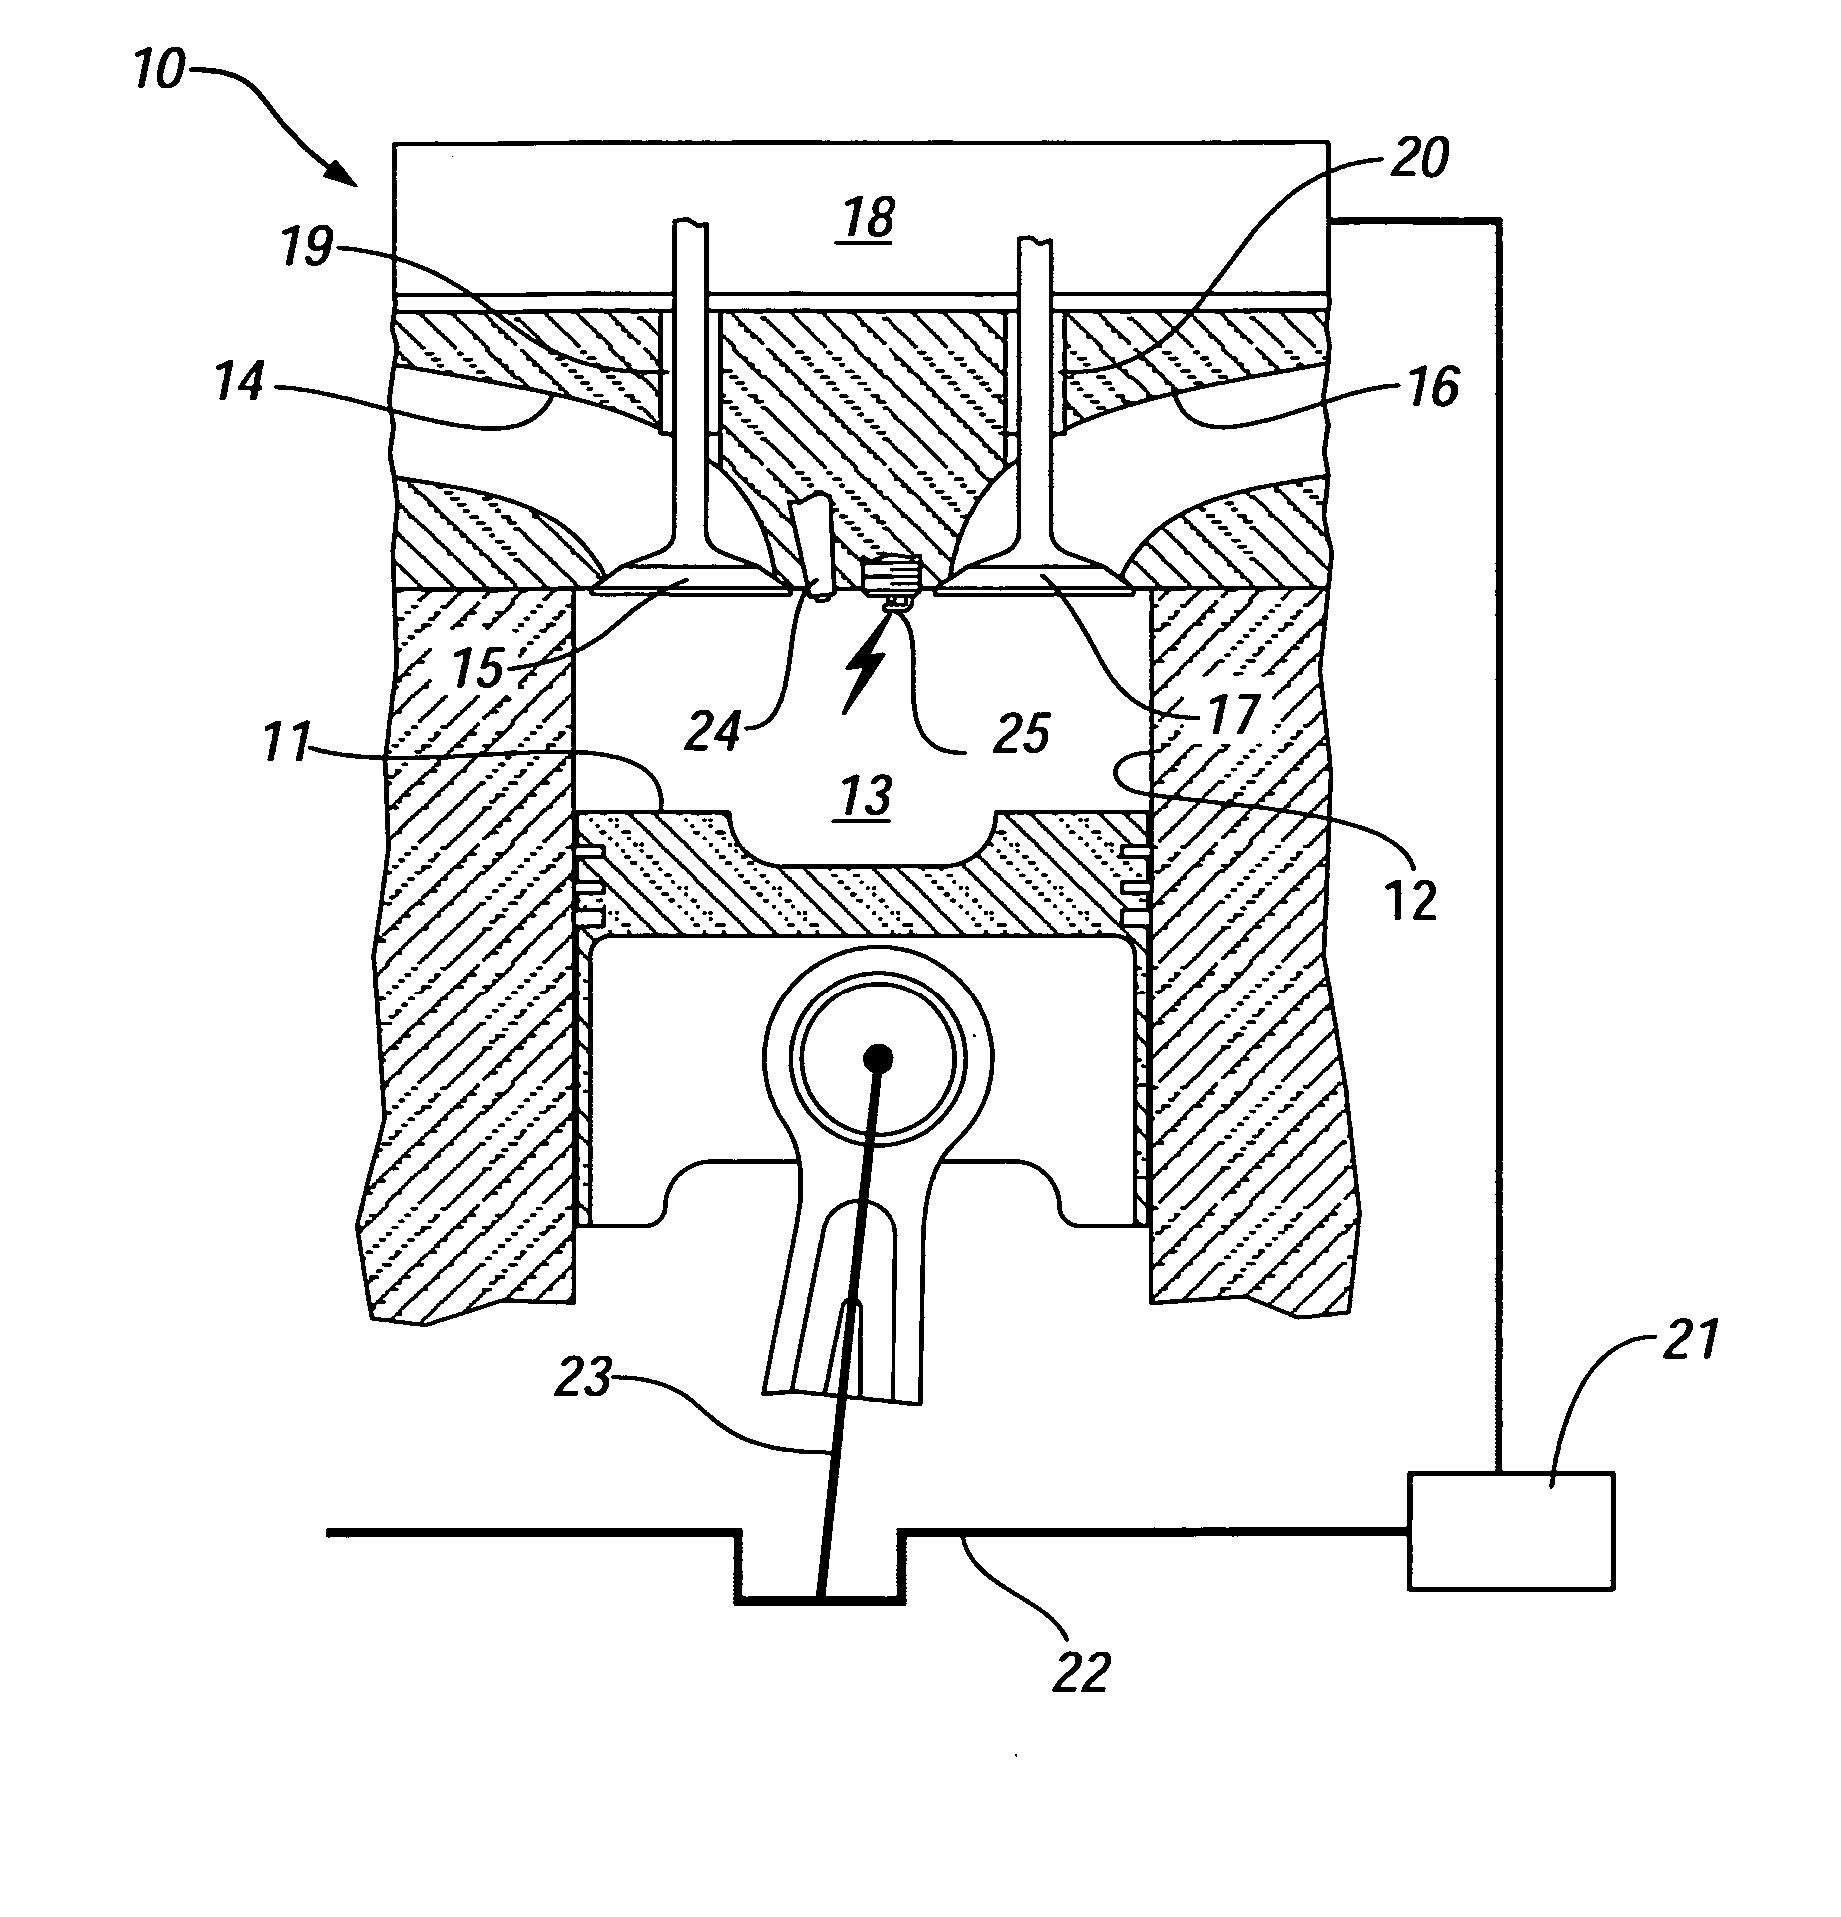 Method for transition between controlled auto-ignition and spark ignition modes in direct fuel injection engines